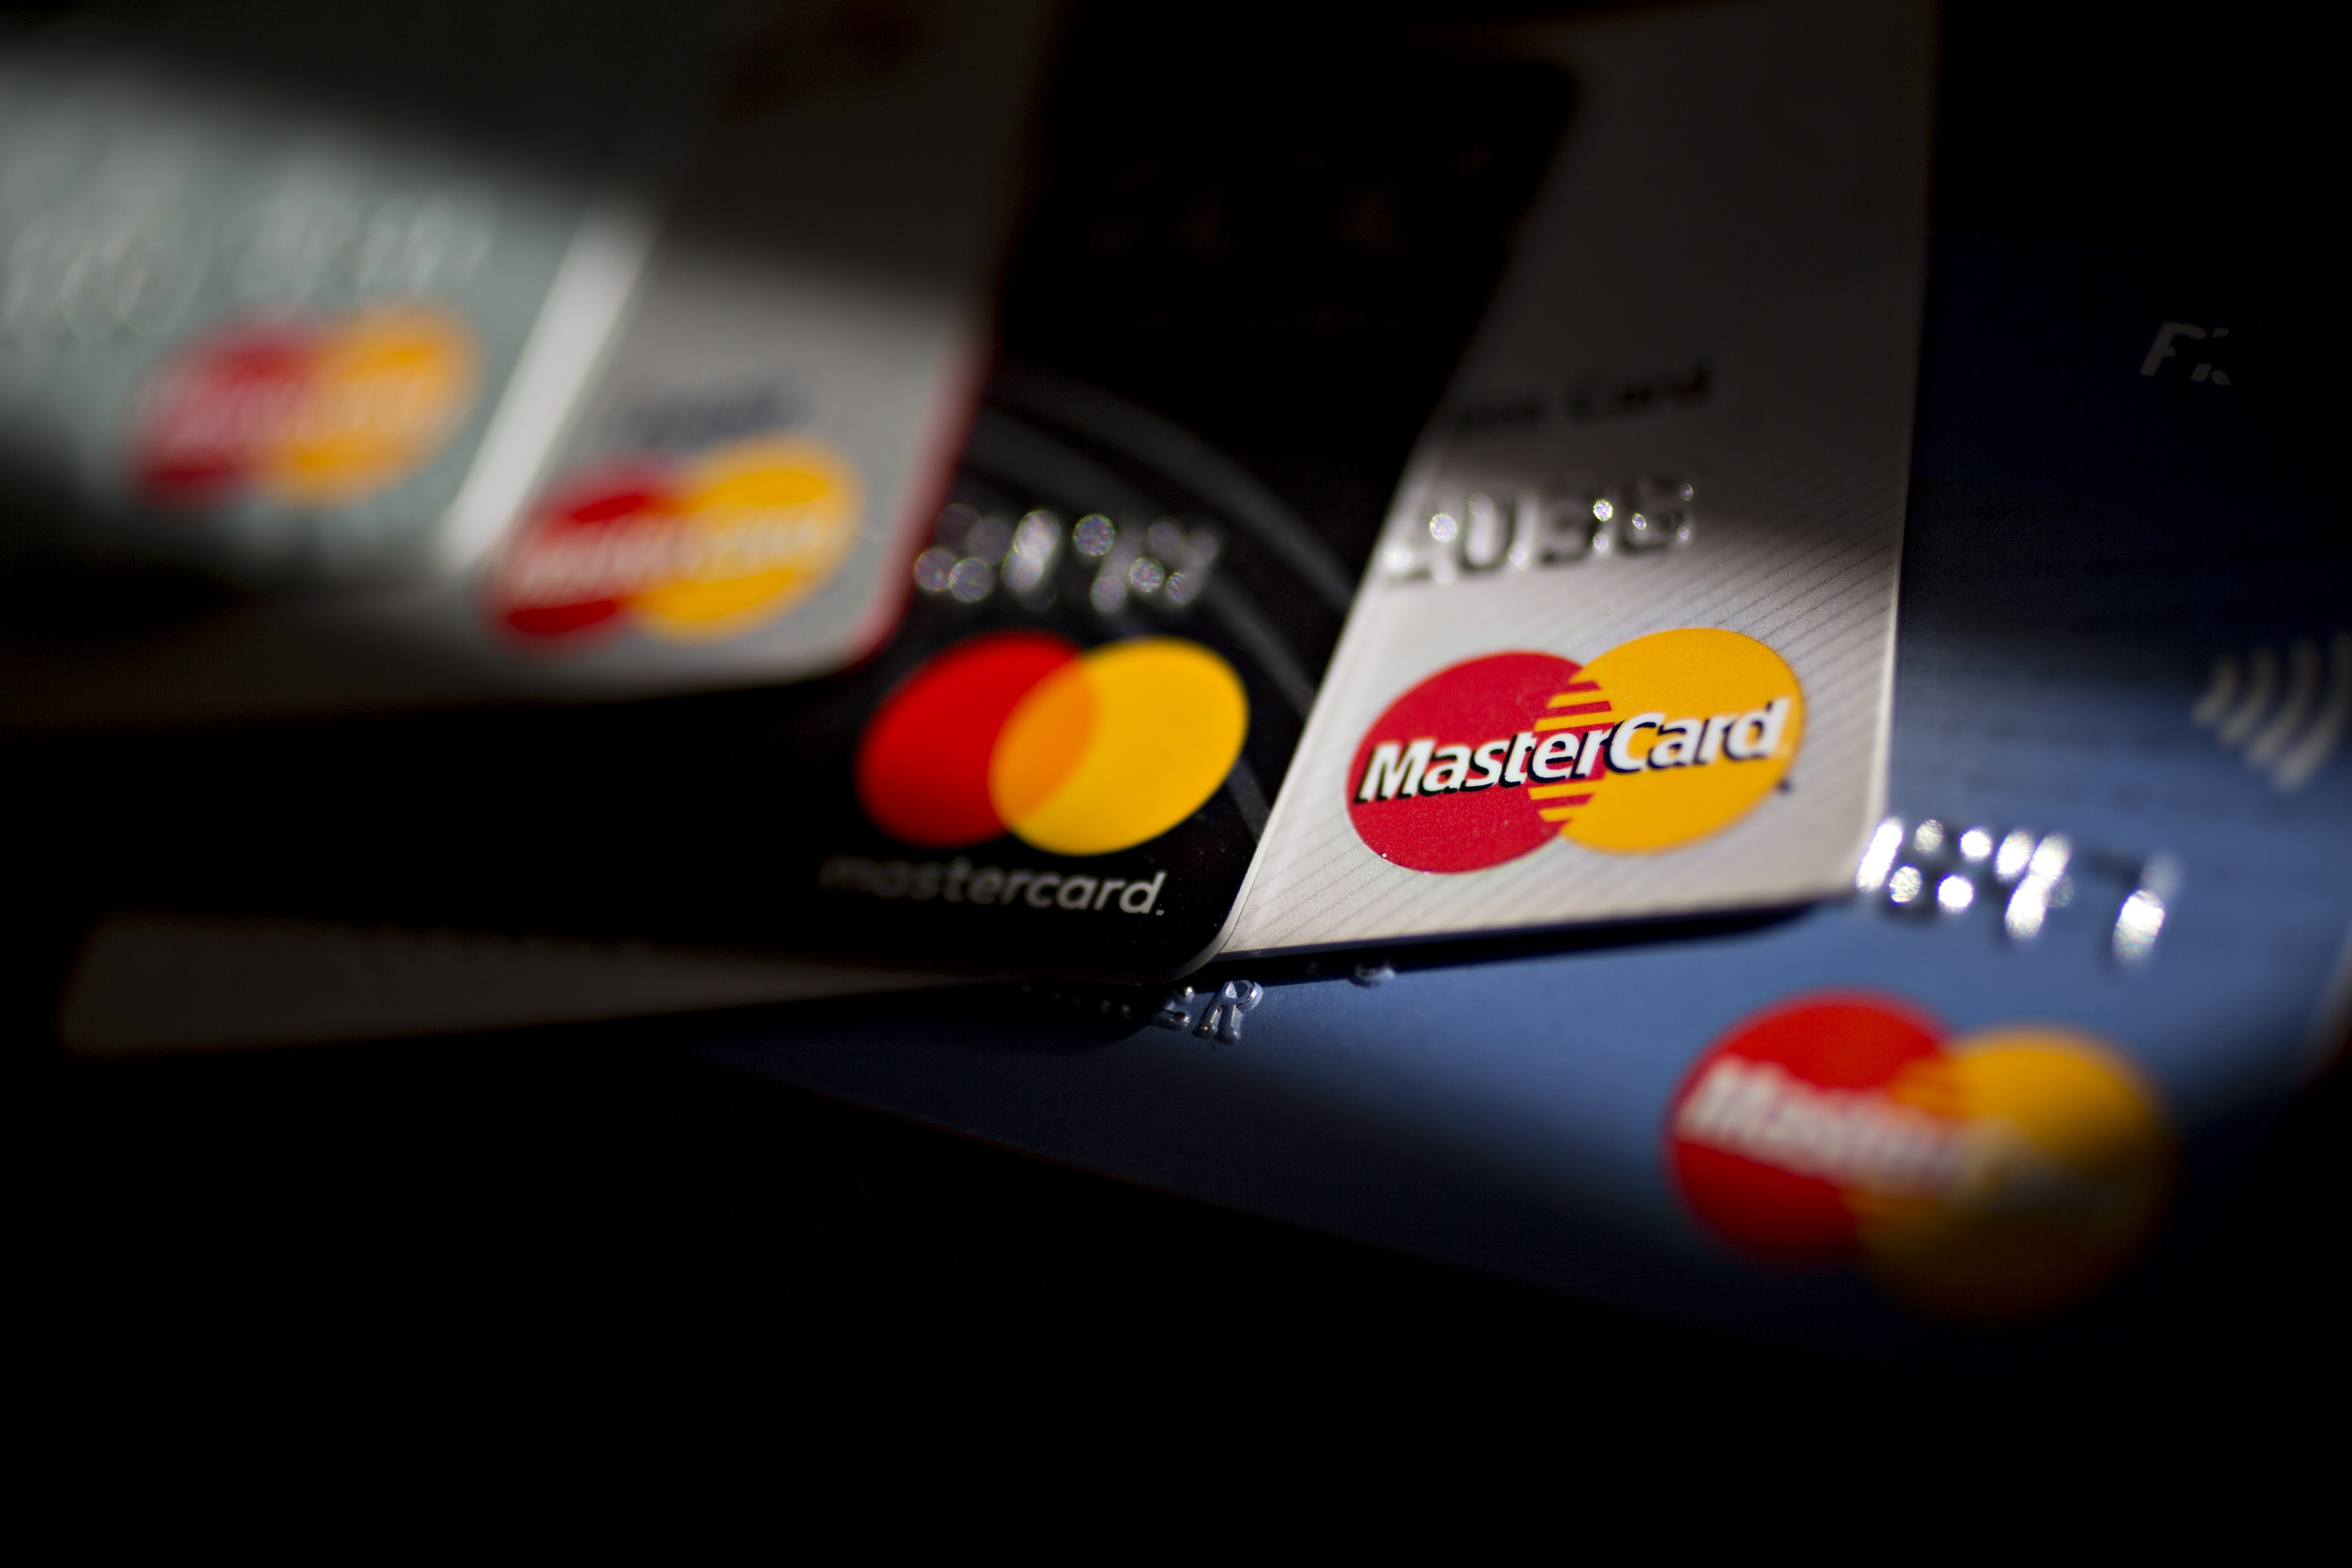 Mastercard Inc. credit and debit cards are arranged for a photograph.